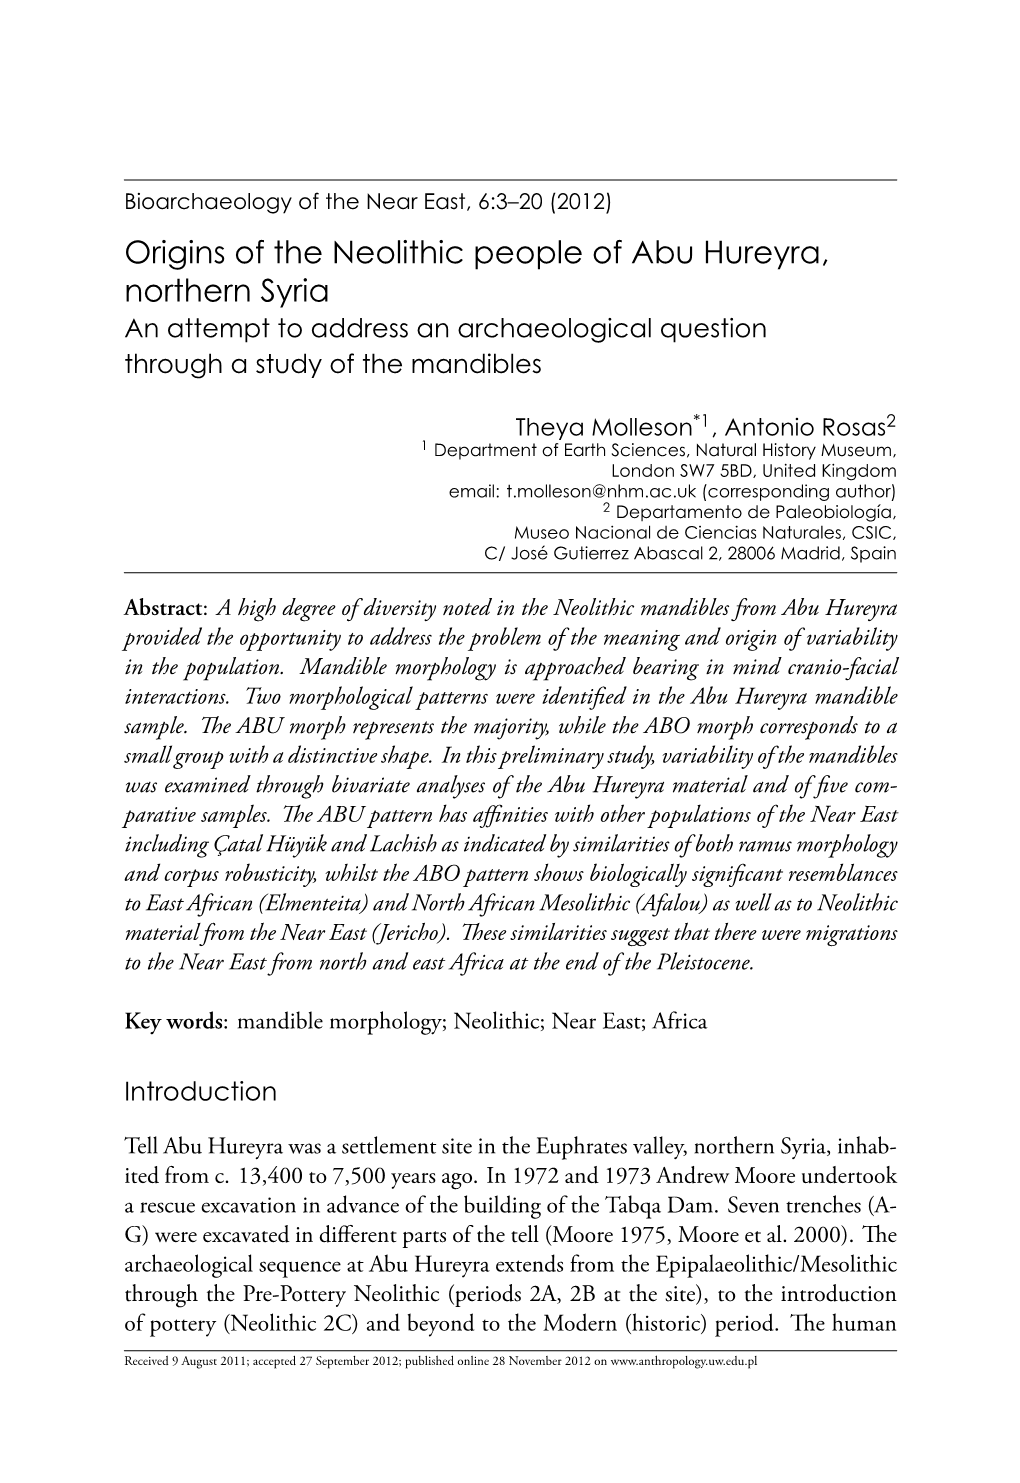 Origins of the Neolithic People of Abu Hureyra, Northern Syria. an Attempt to Address an Archaeological Question Through a Study